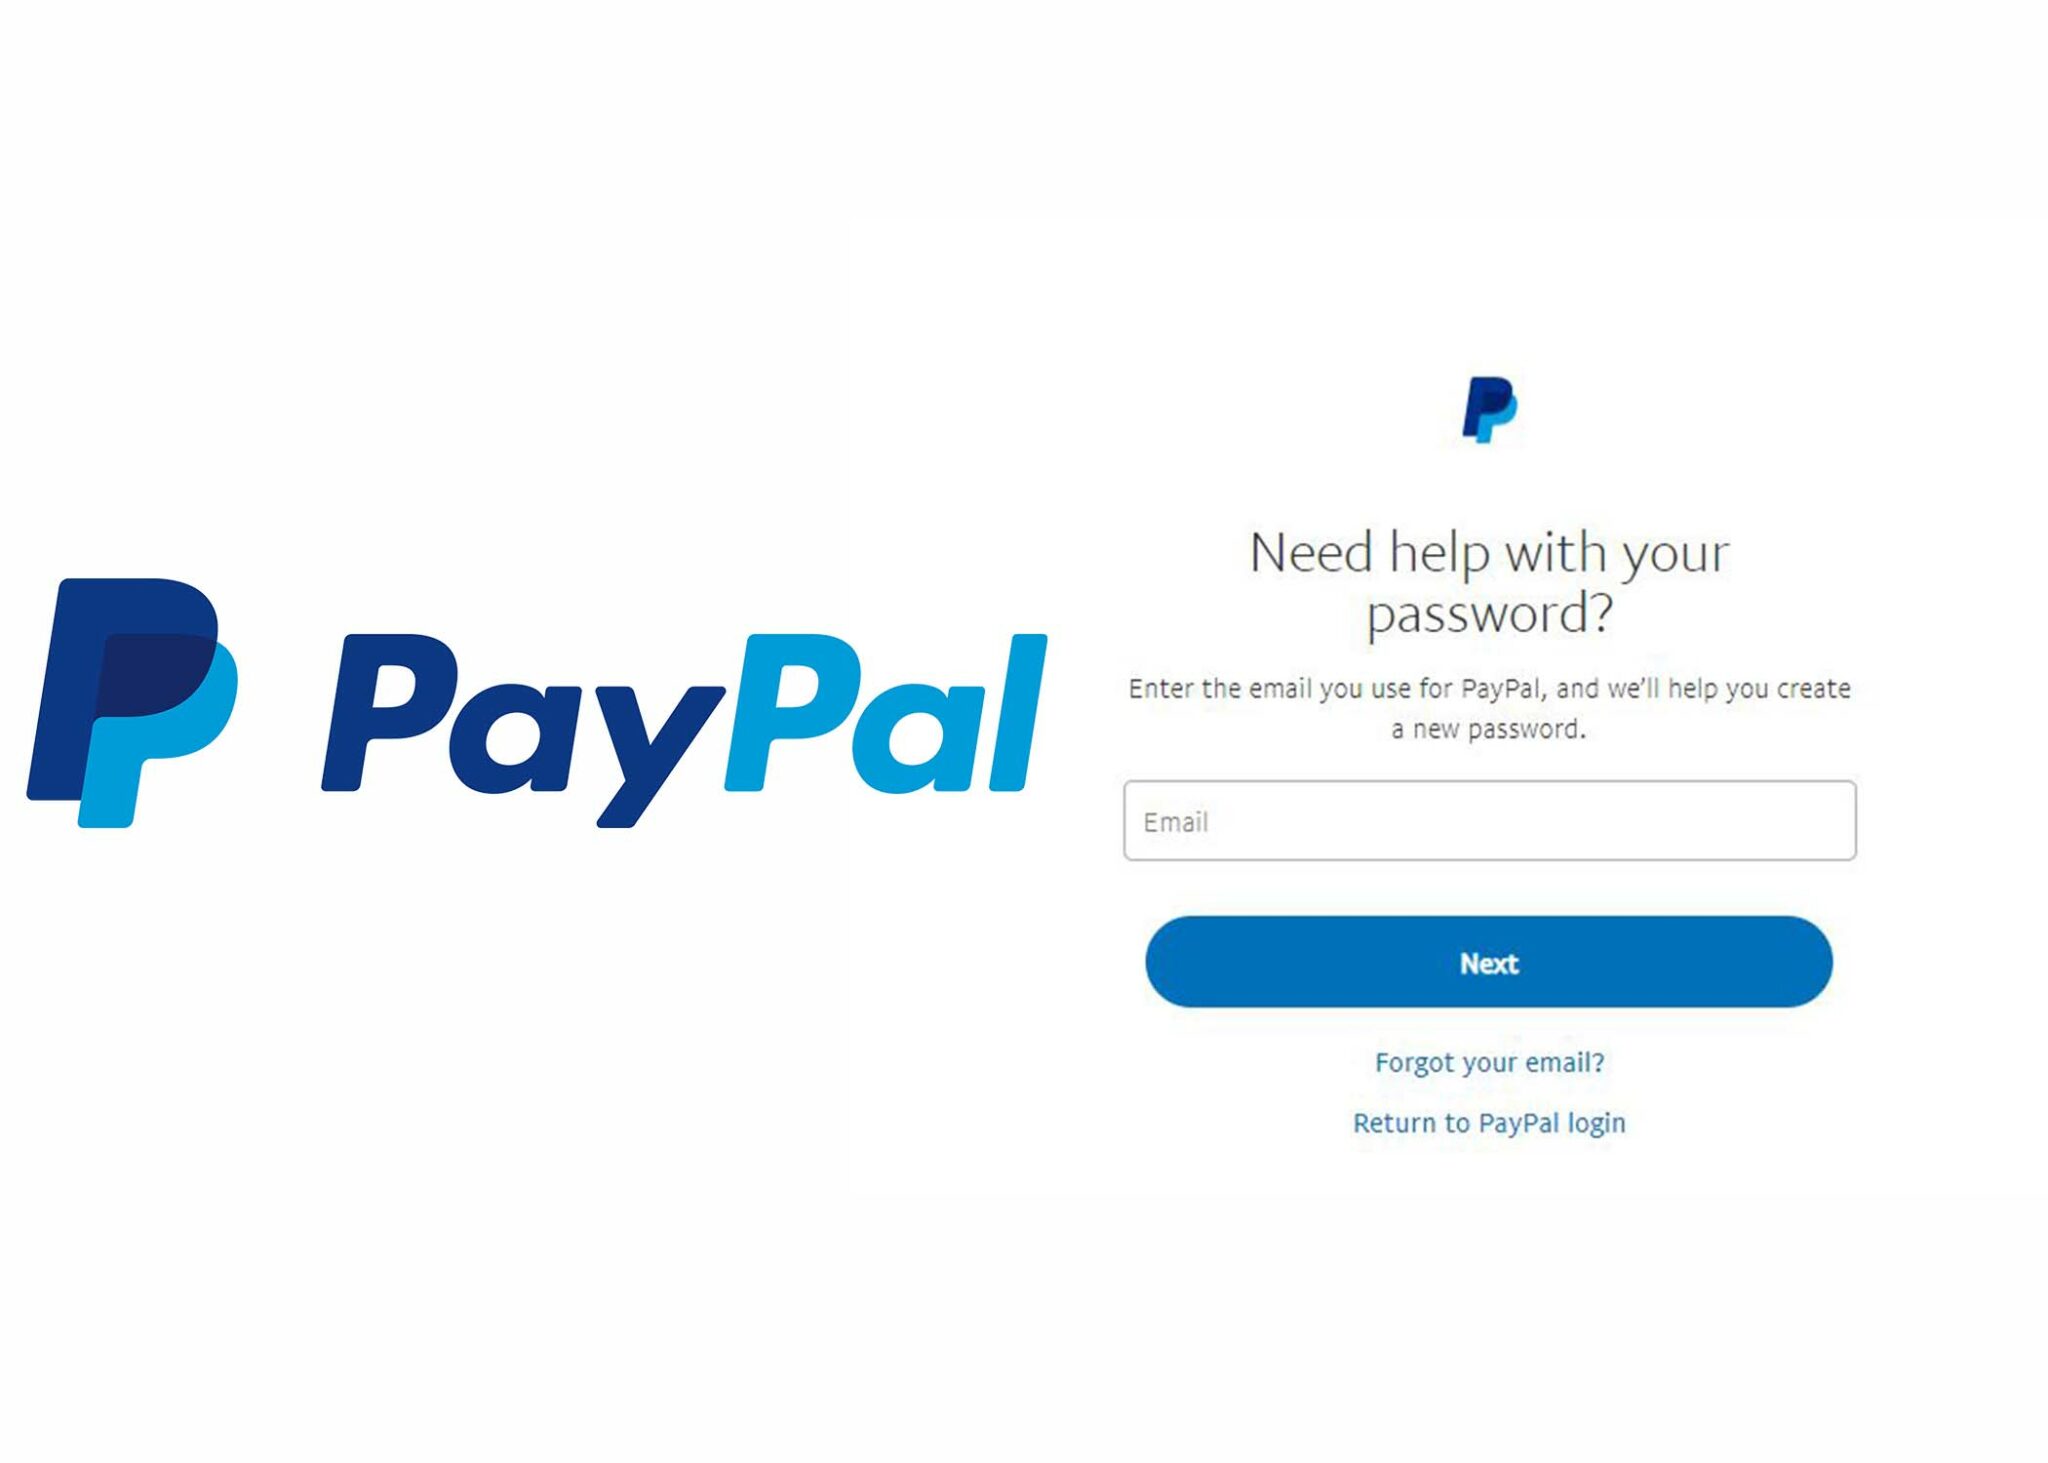 PayPal Change Password - How to Change Your PayPal Password or Reset It